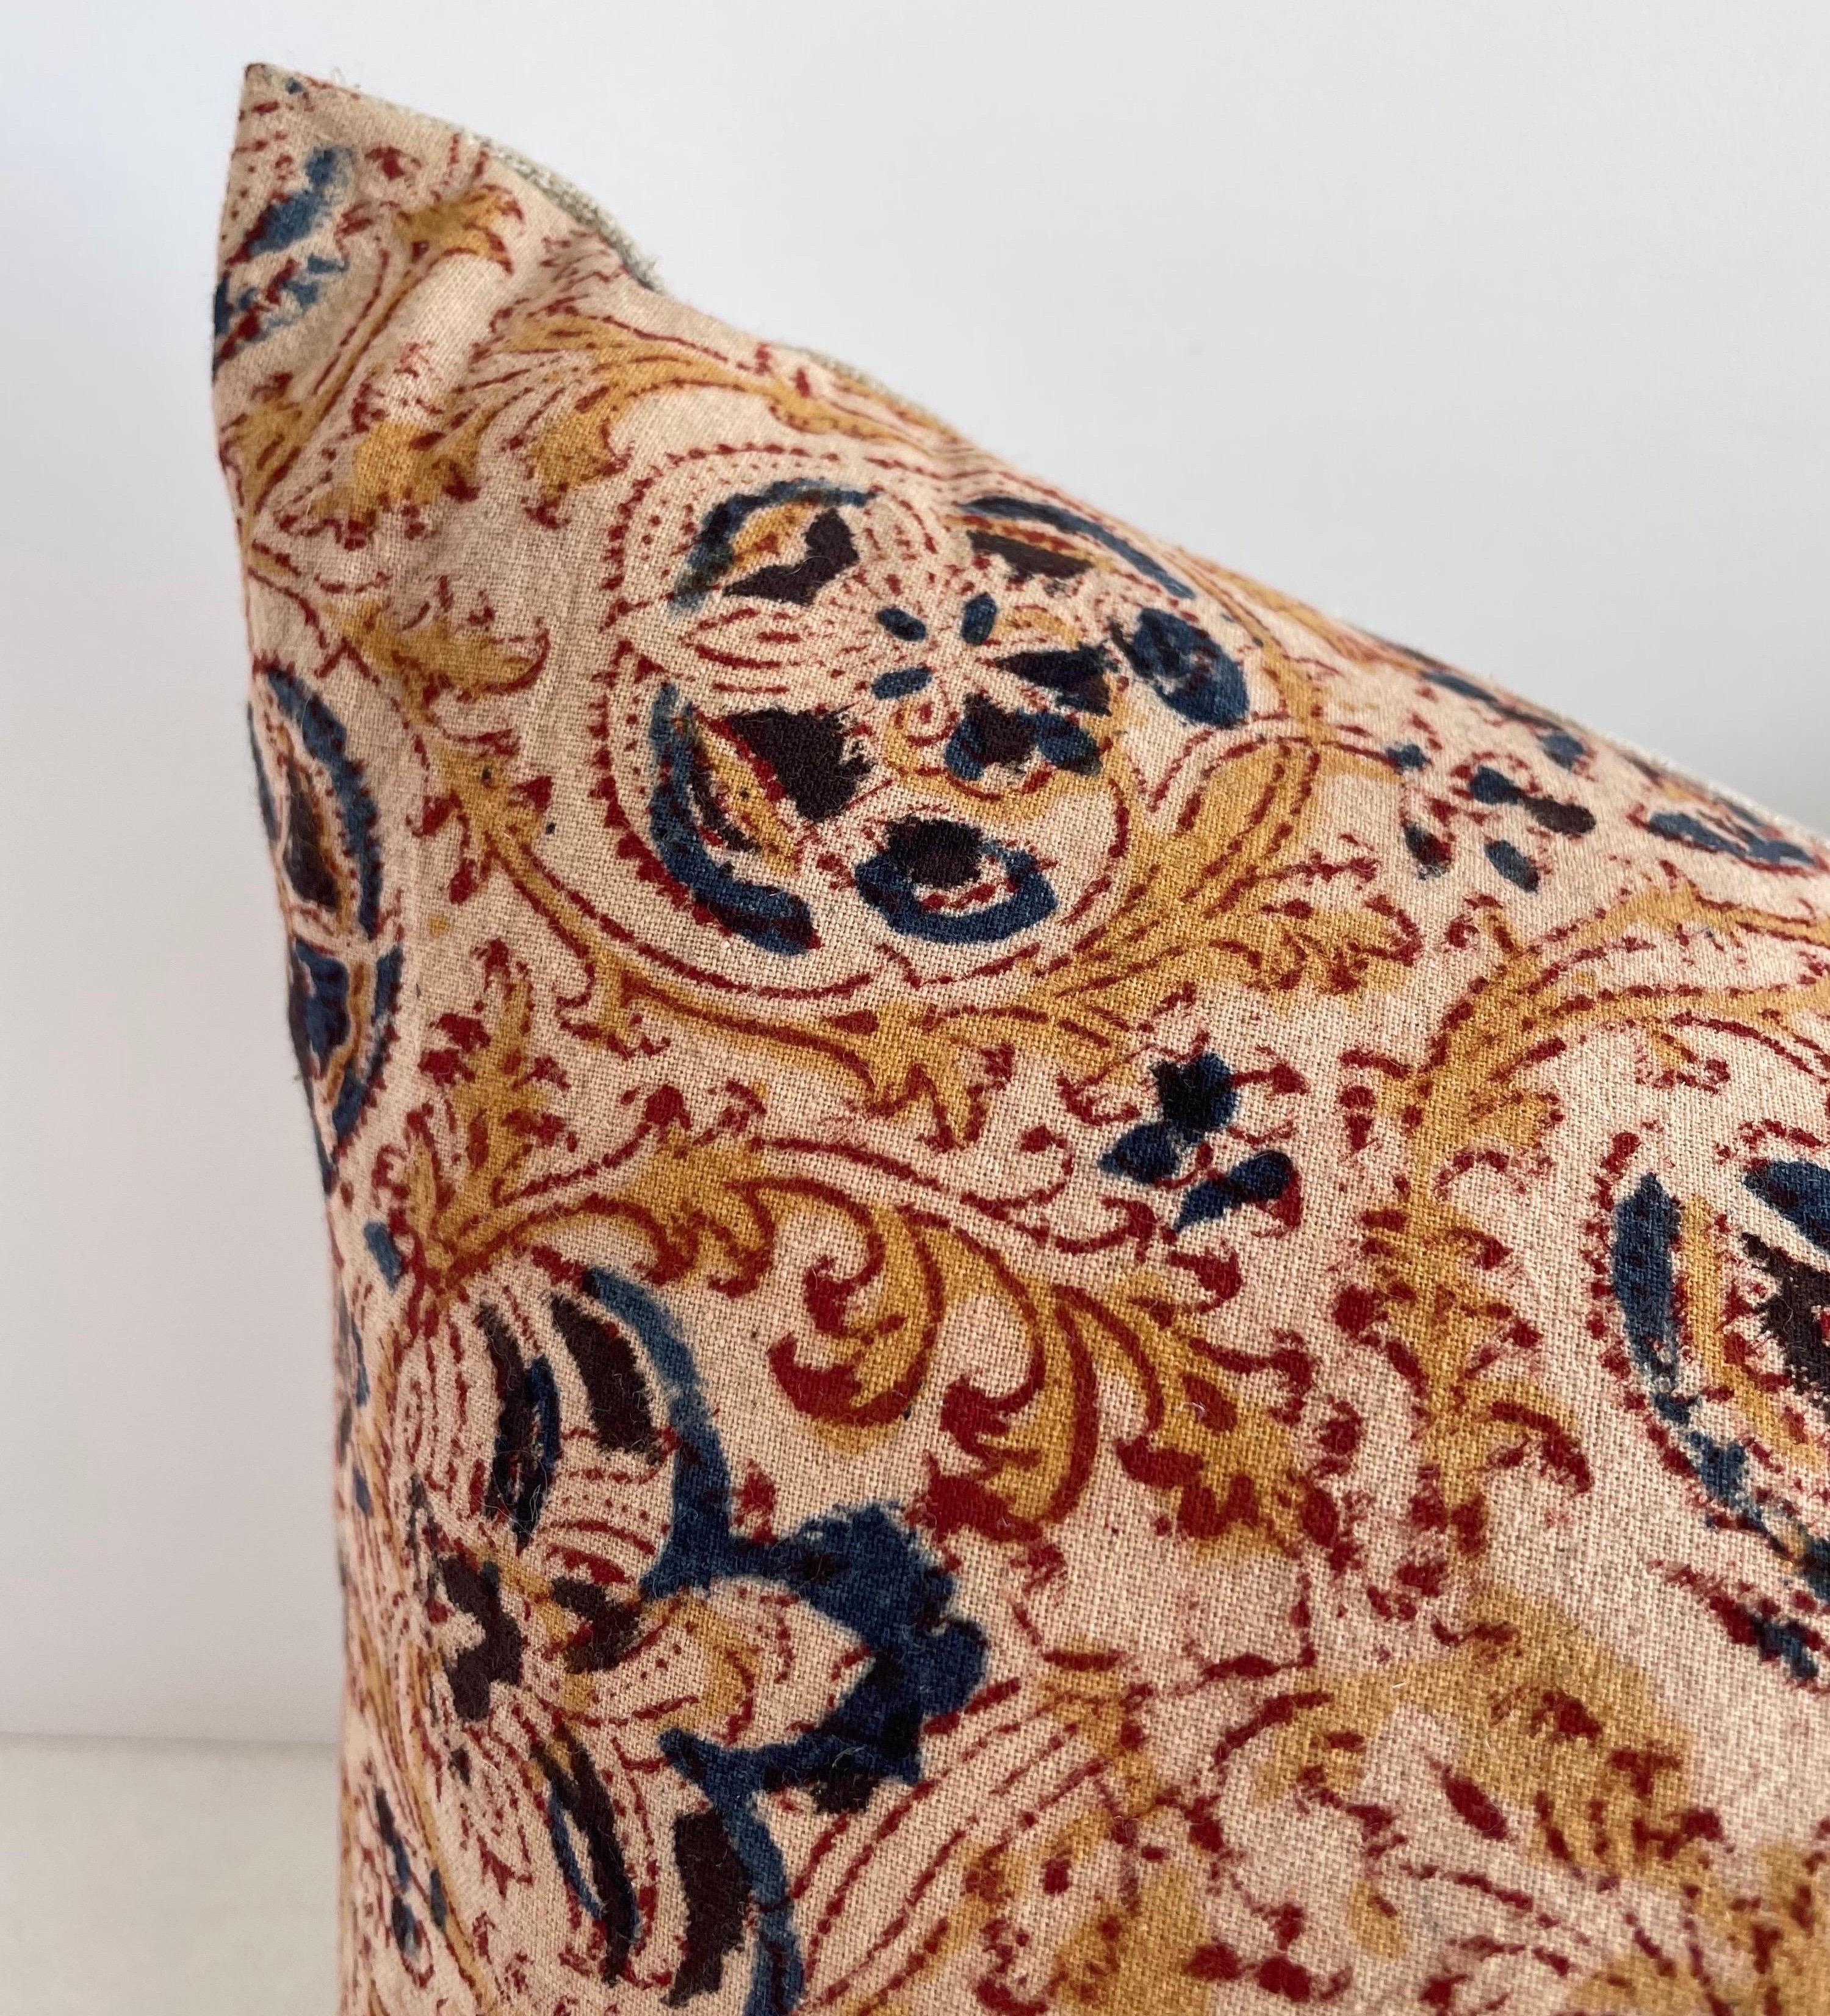 Beautifully hand block-printed pillow on linen fabric. Featuring a floral pattern in the color mustard. Solid linen back. Care instructions: dry clean recommended

Size: 14” x 20” 
Insert included.